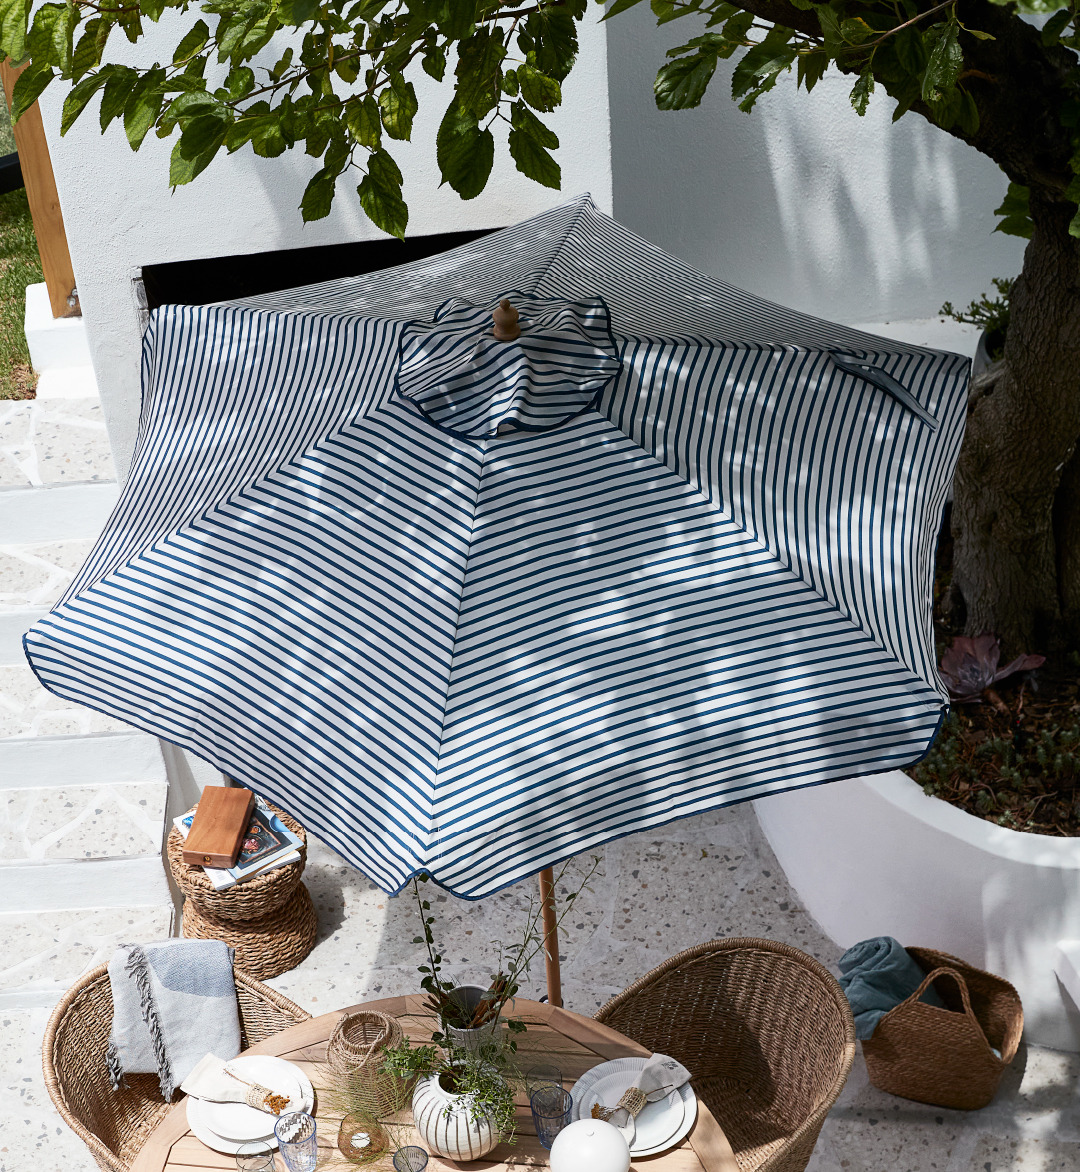 White and blue striped parasol above garden table